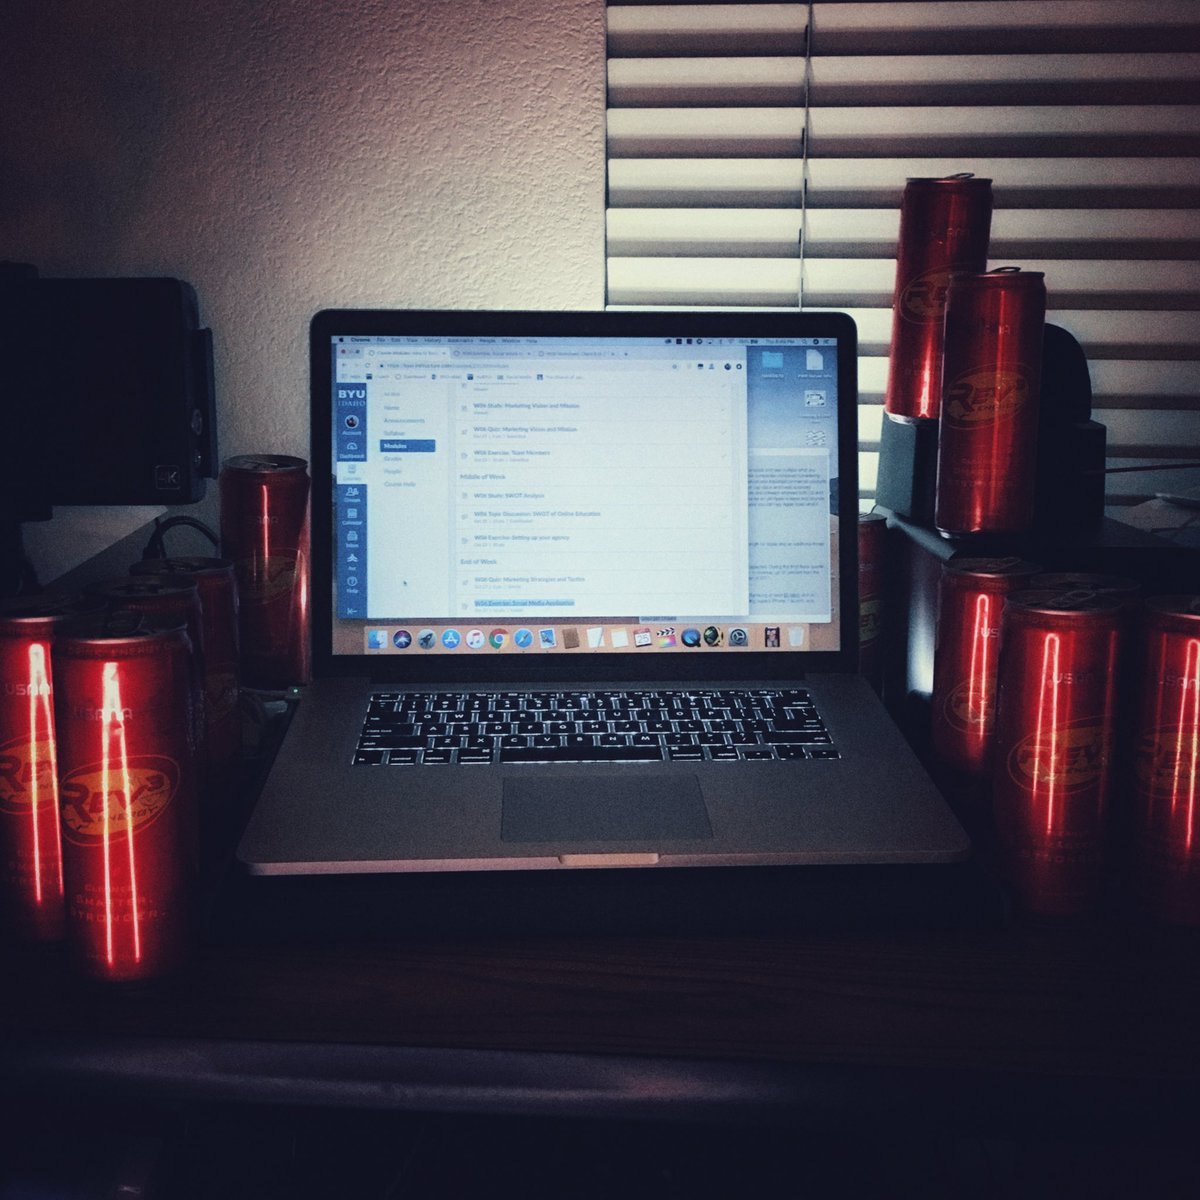 Studying SWOT analysis in my social media marketing class. Late nights sipping #REV3Energy. Cheers!😴🍷💥🤩